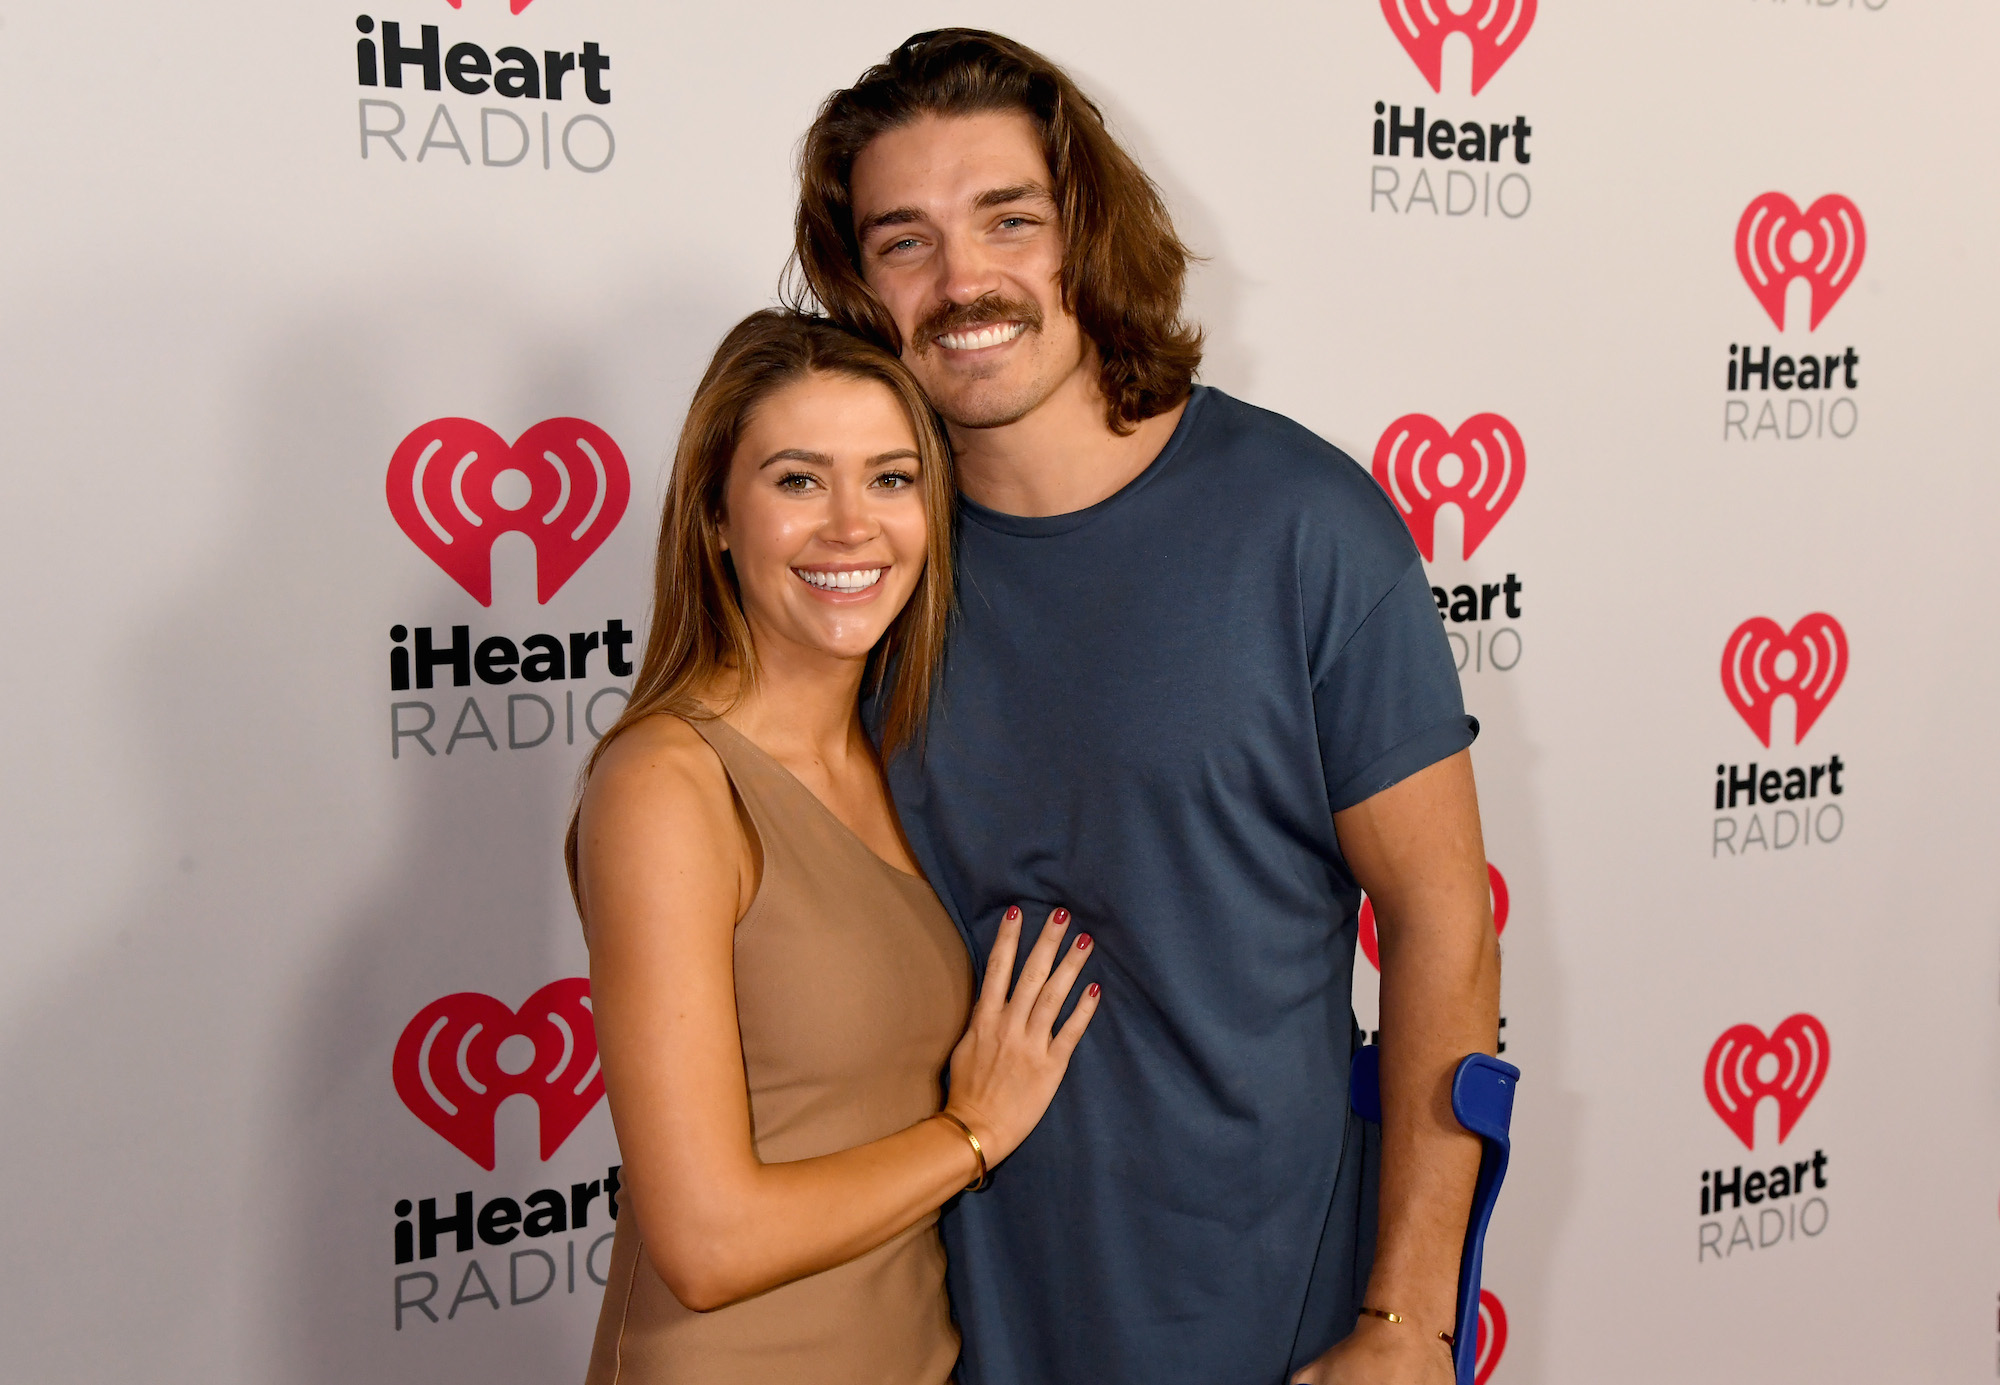 Caelynn Miller-Keyes and Dean Unglert attend the 2020 iHeartRadio Podcast Awards at the iHeartRadio Theater